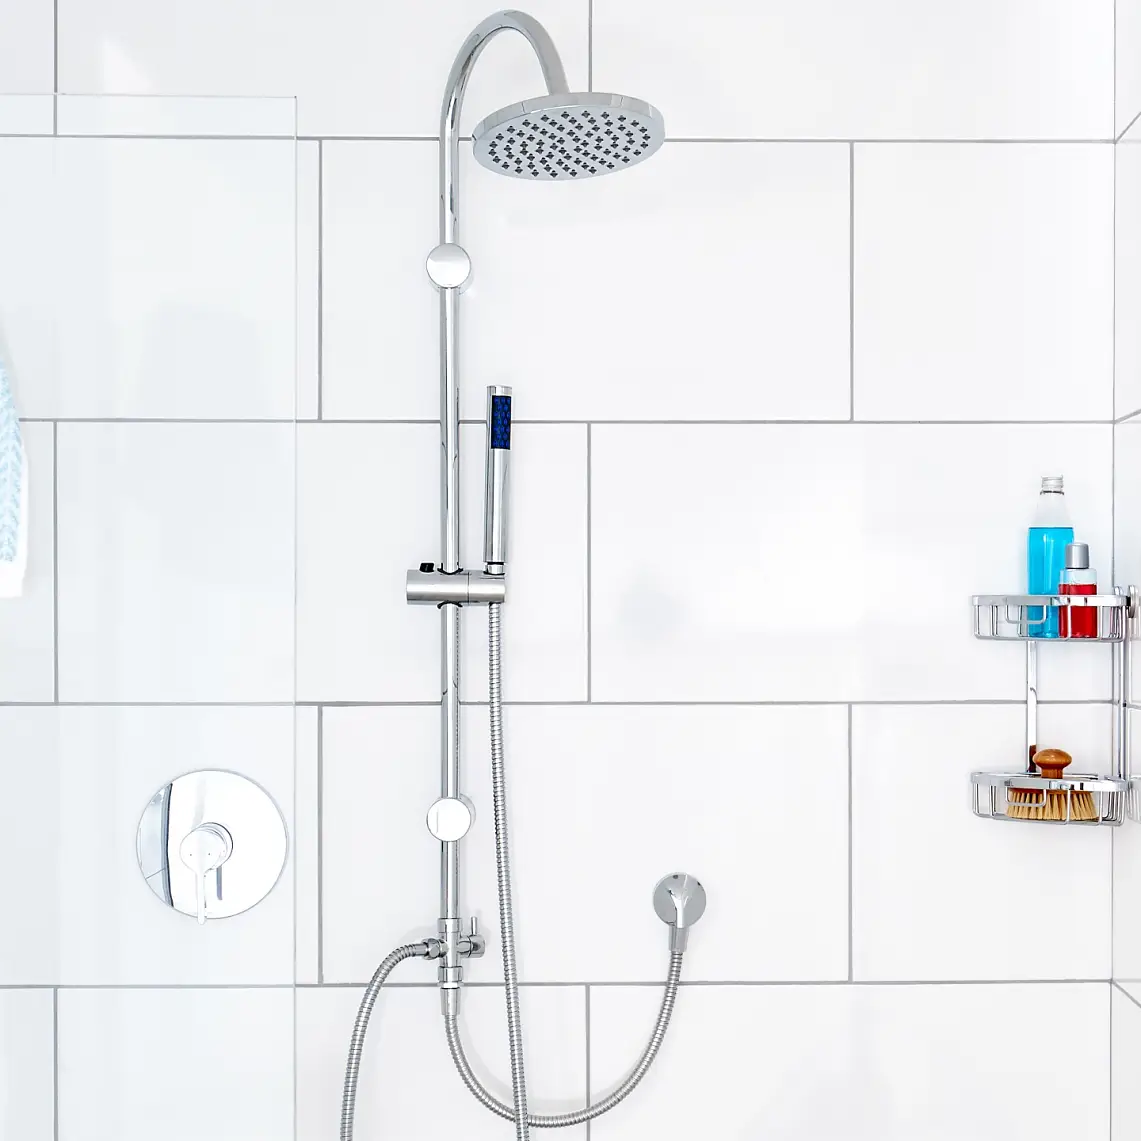 The center piece of your shower. Our minimalistic shower bar designs optimize your shower flow and experience.